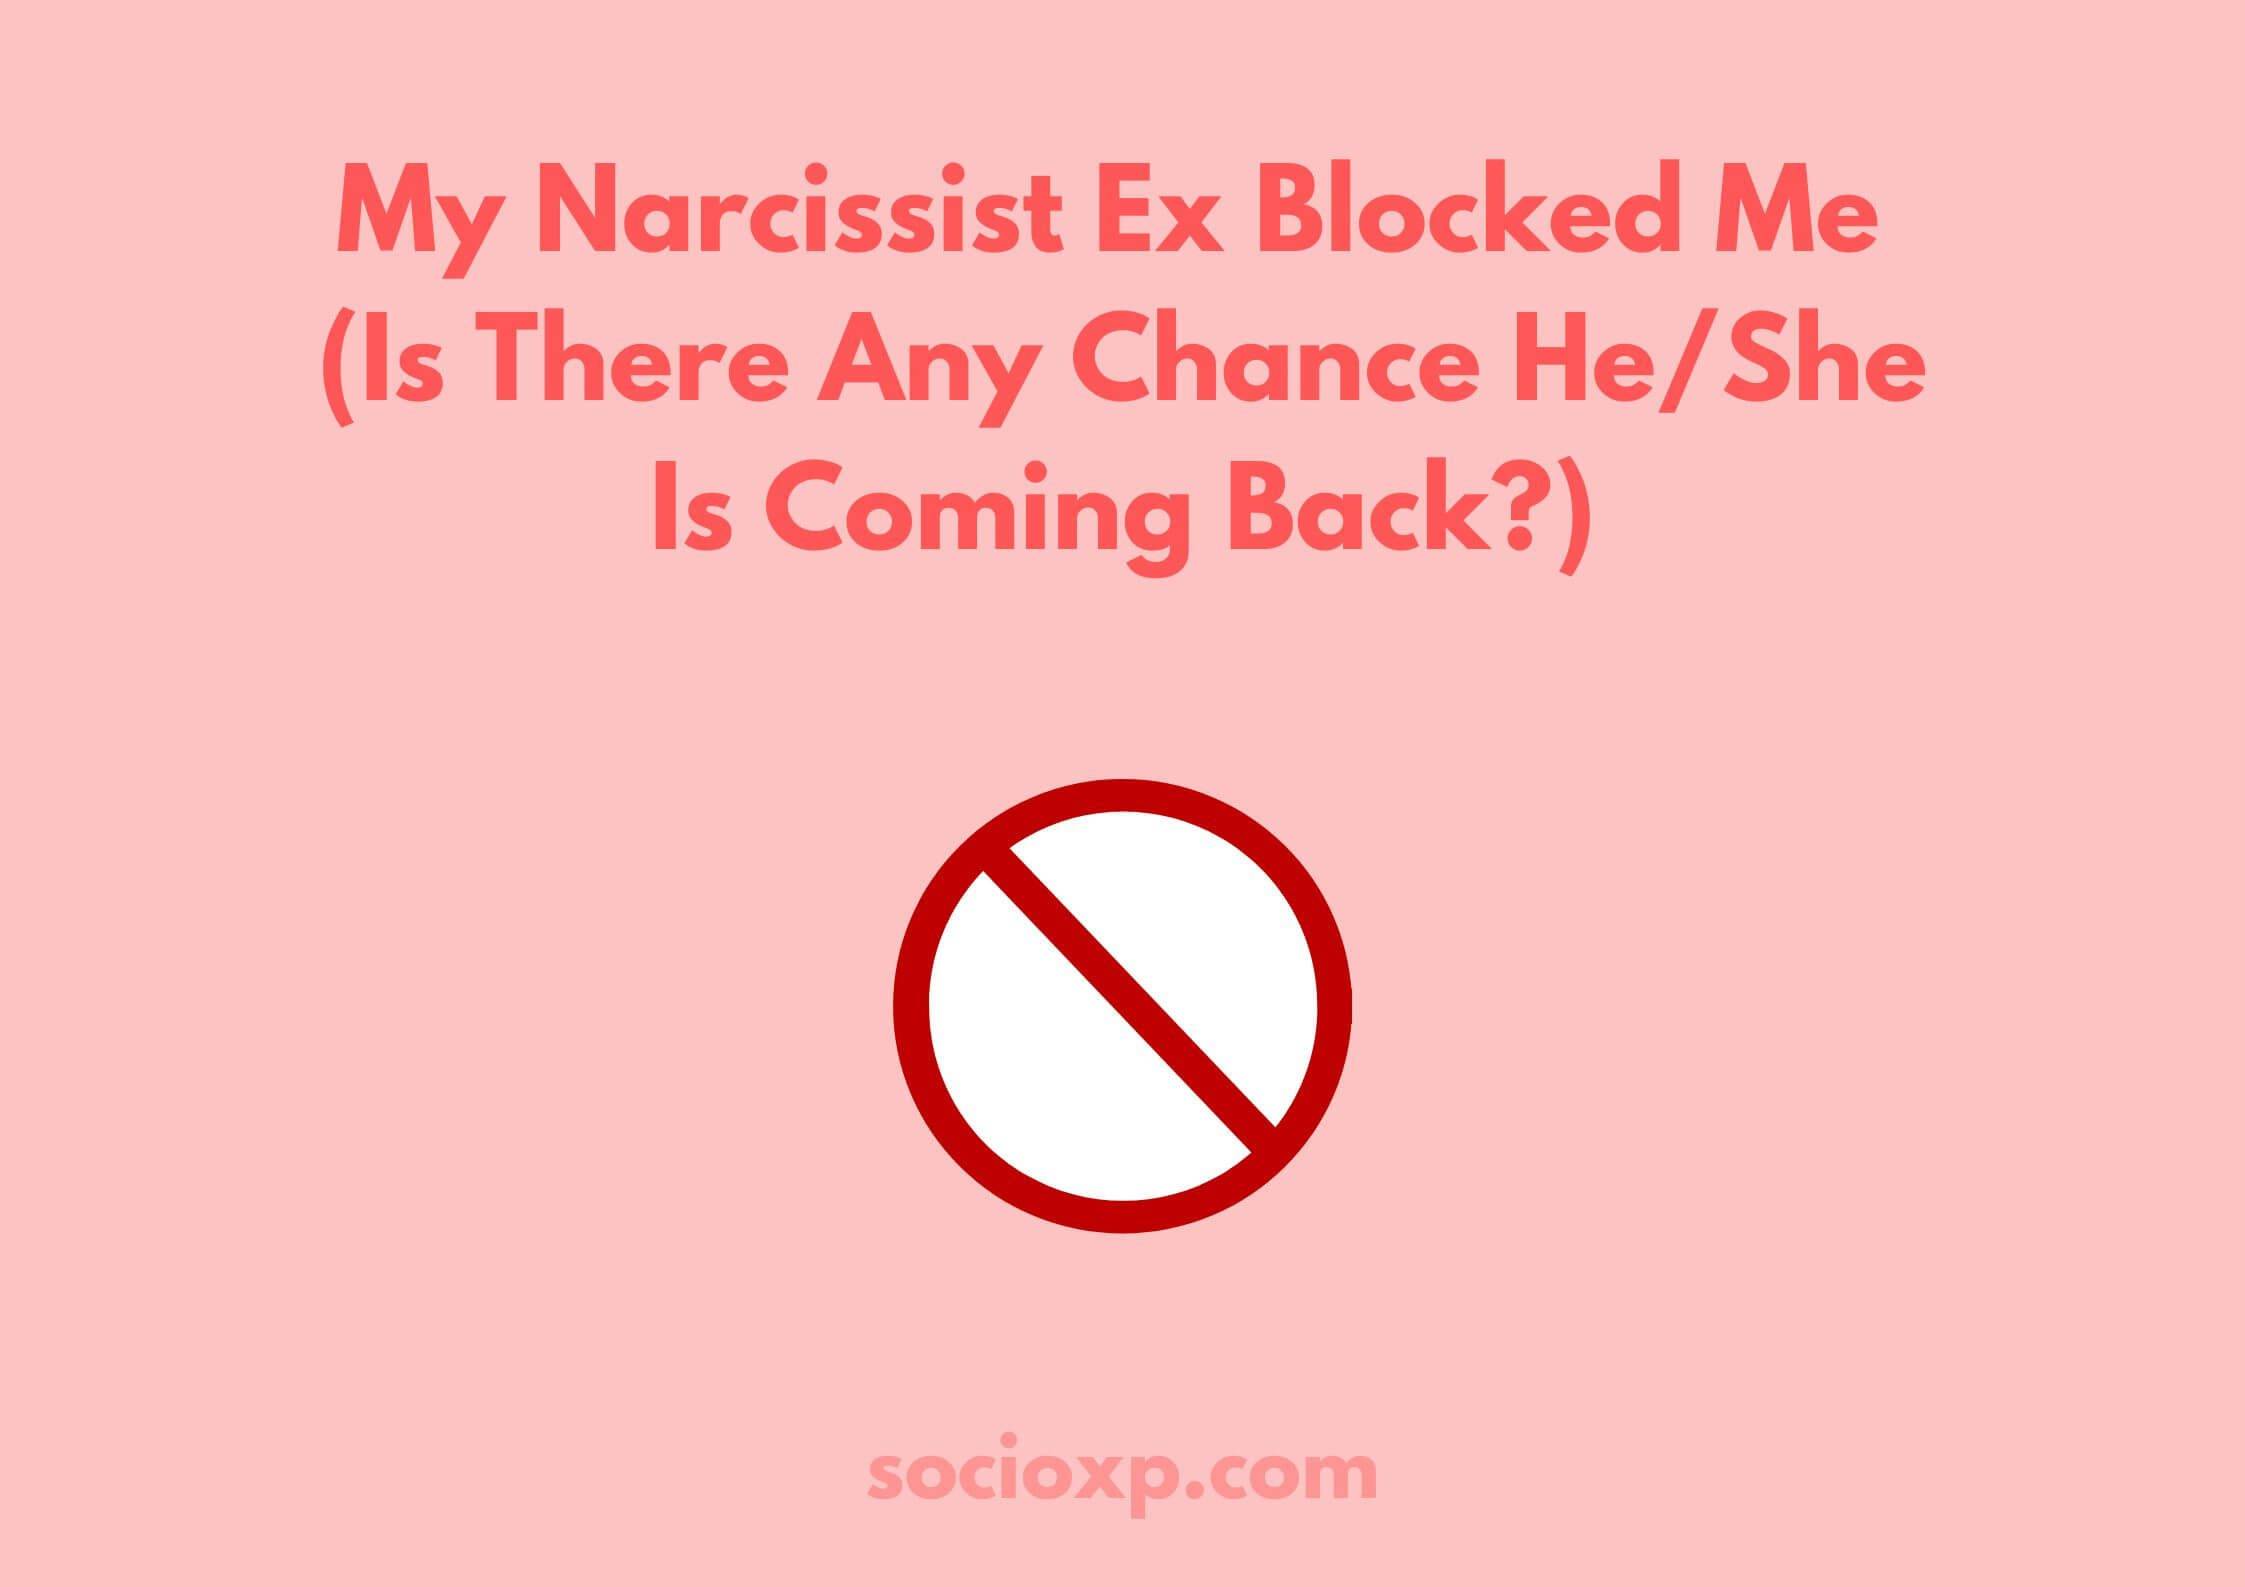 My Narcissist Ex Blocked Me (Is There Any Chance He/She Is Coming Back?)